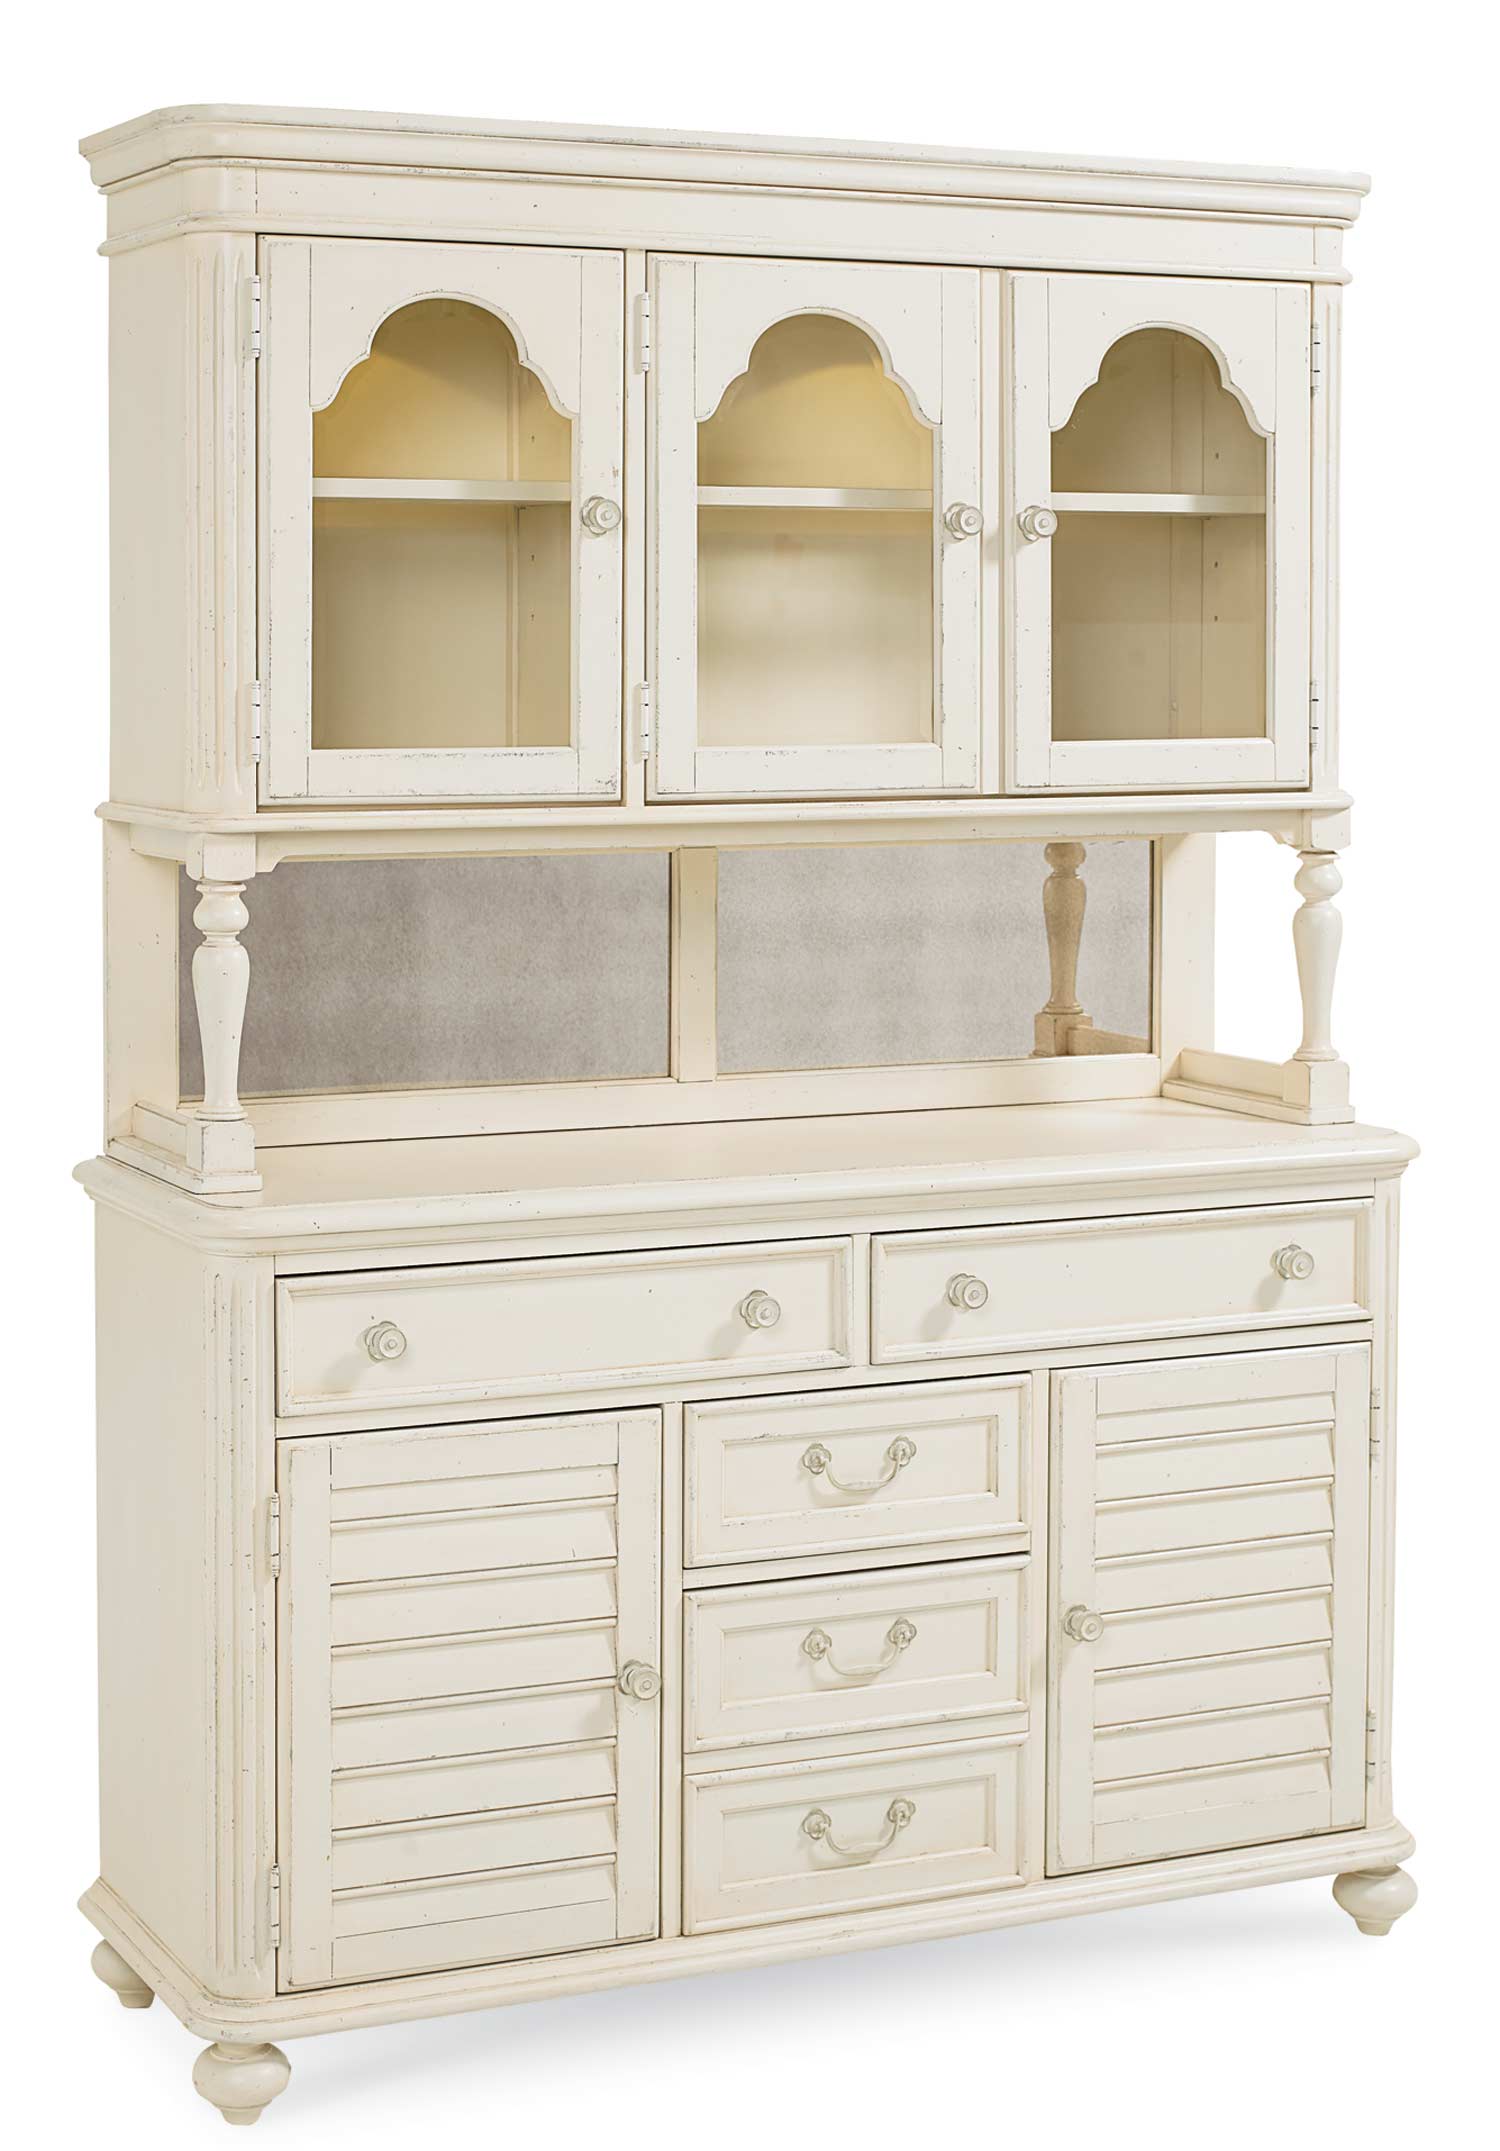 Legacy Classic Haven China Cabinet - Buttercream White/Slight Distressing